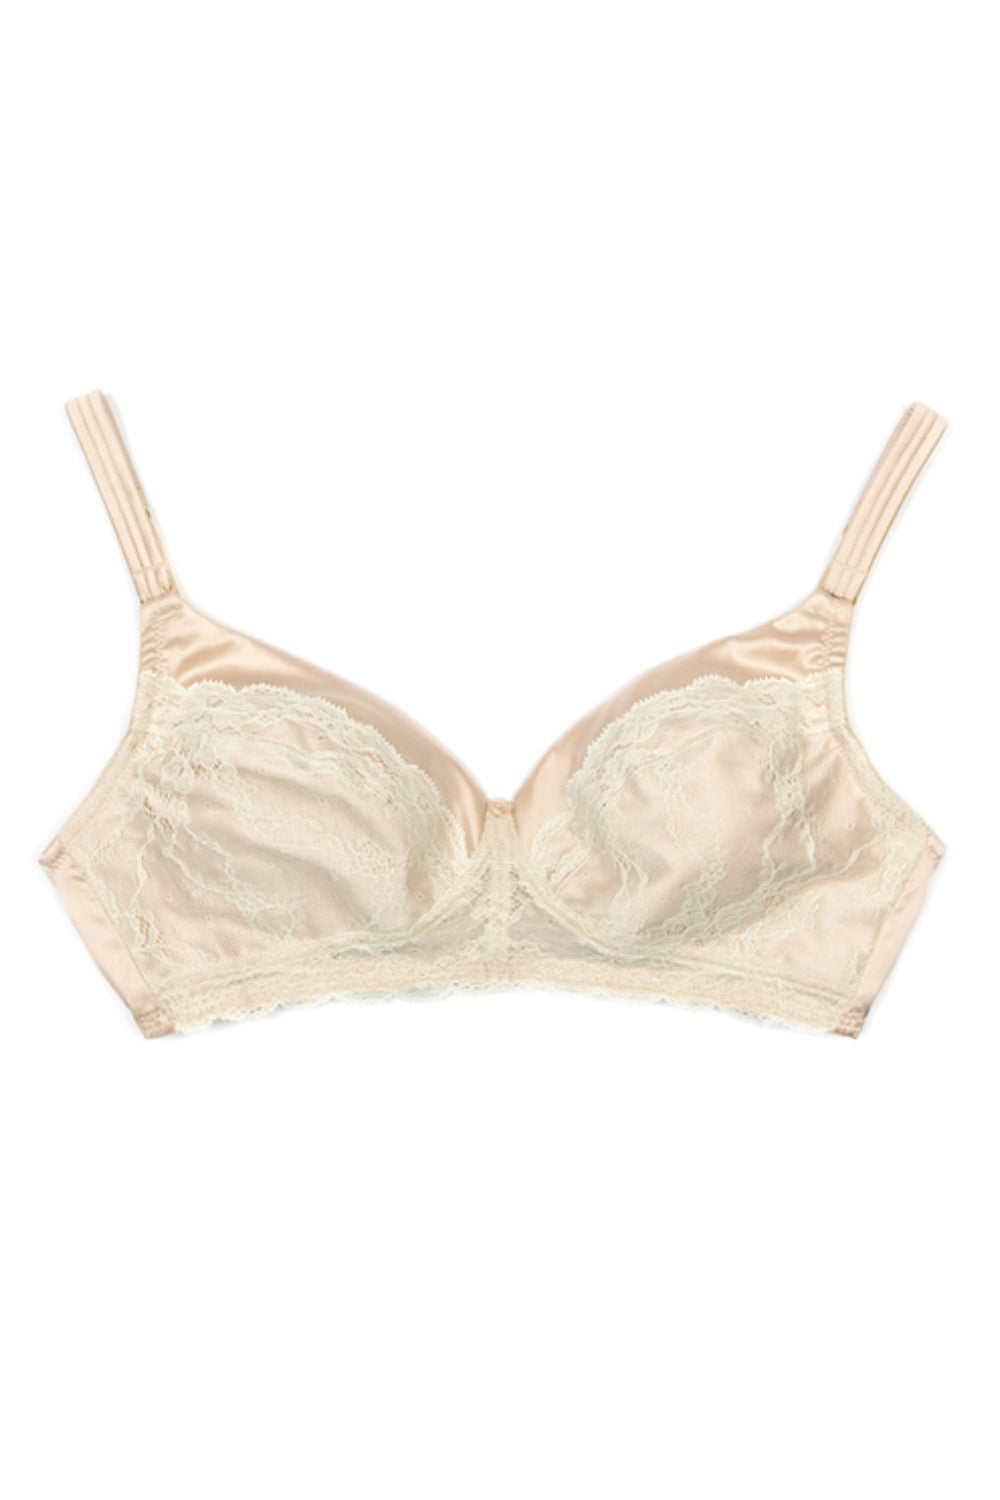 Gold and Ivory Maternity Bra